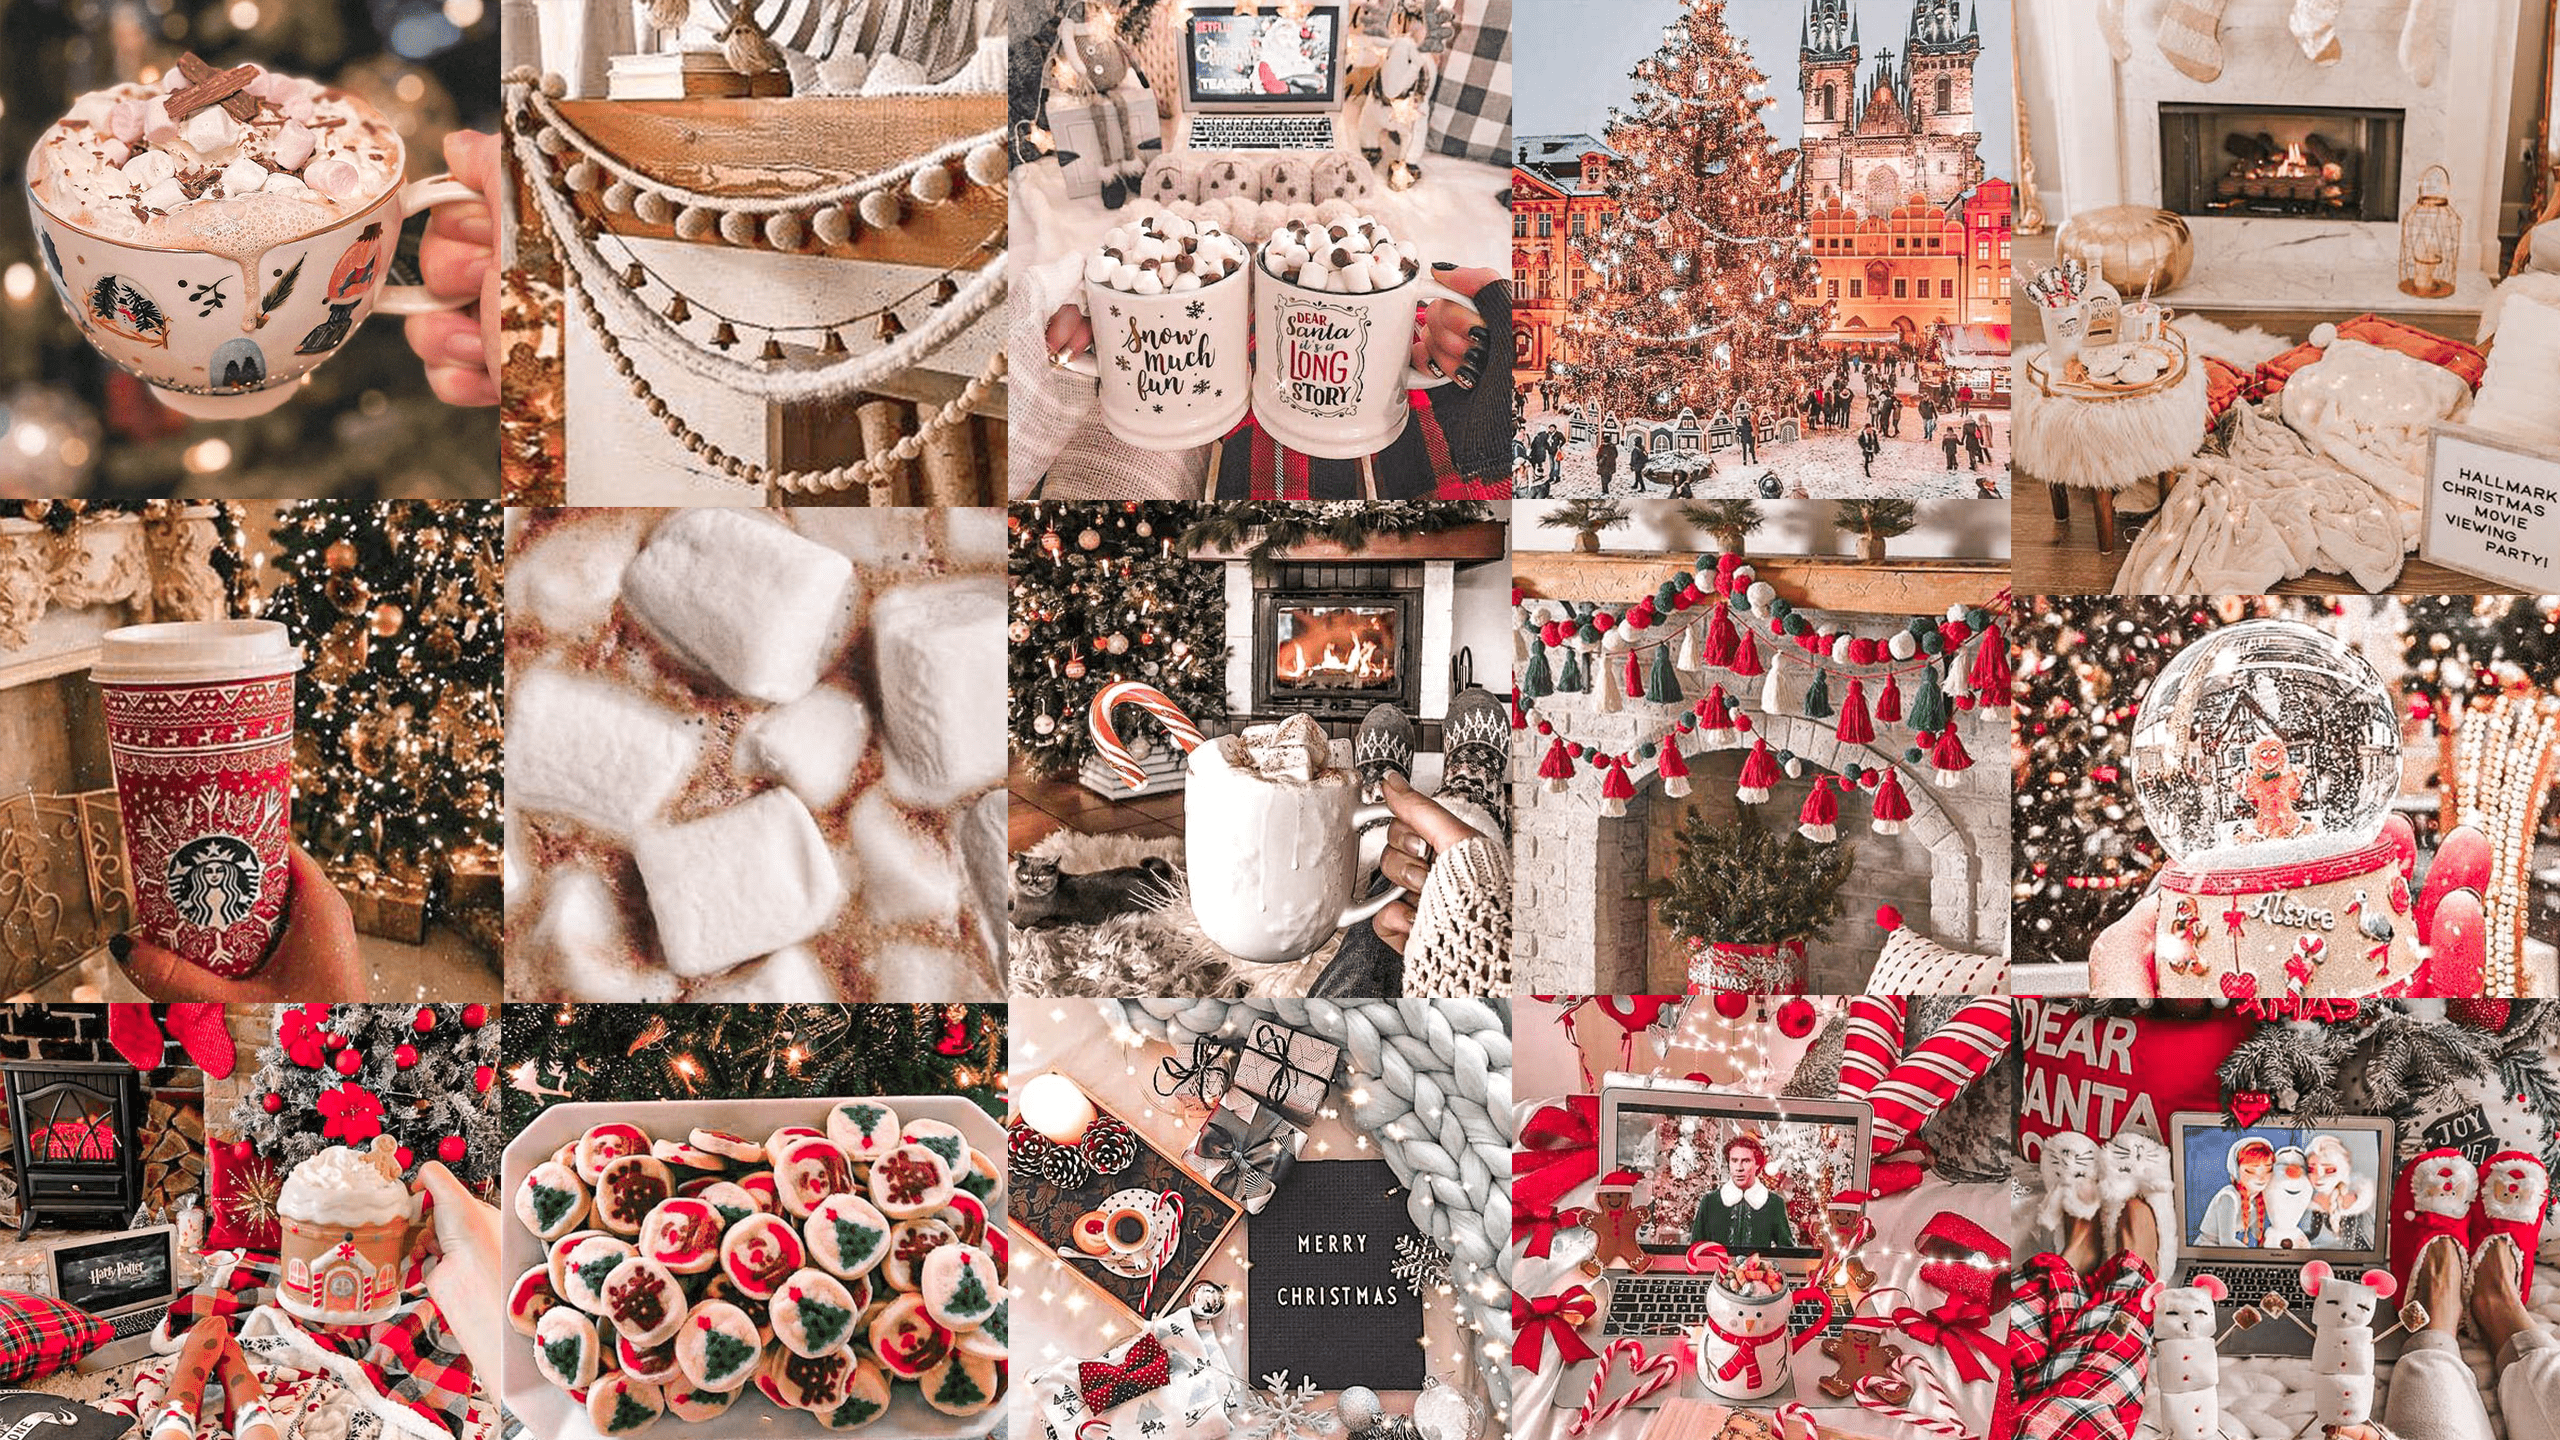 A collage of red and white Christmas images - Christmas, white Christmas